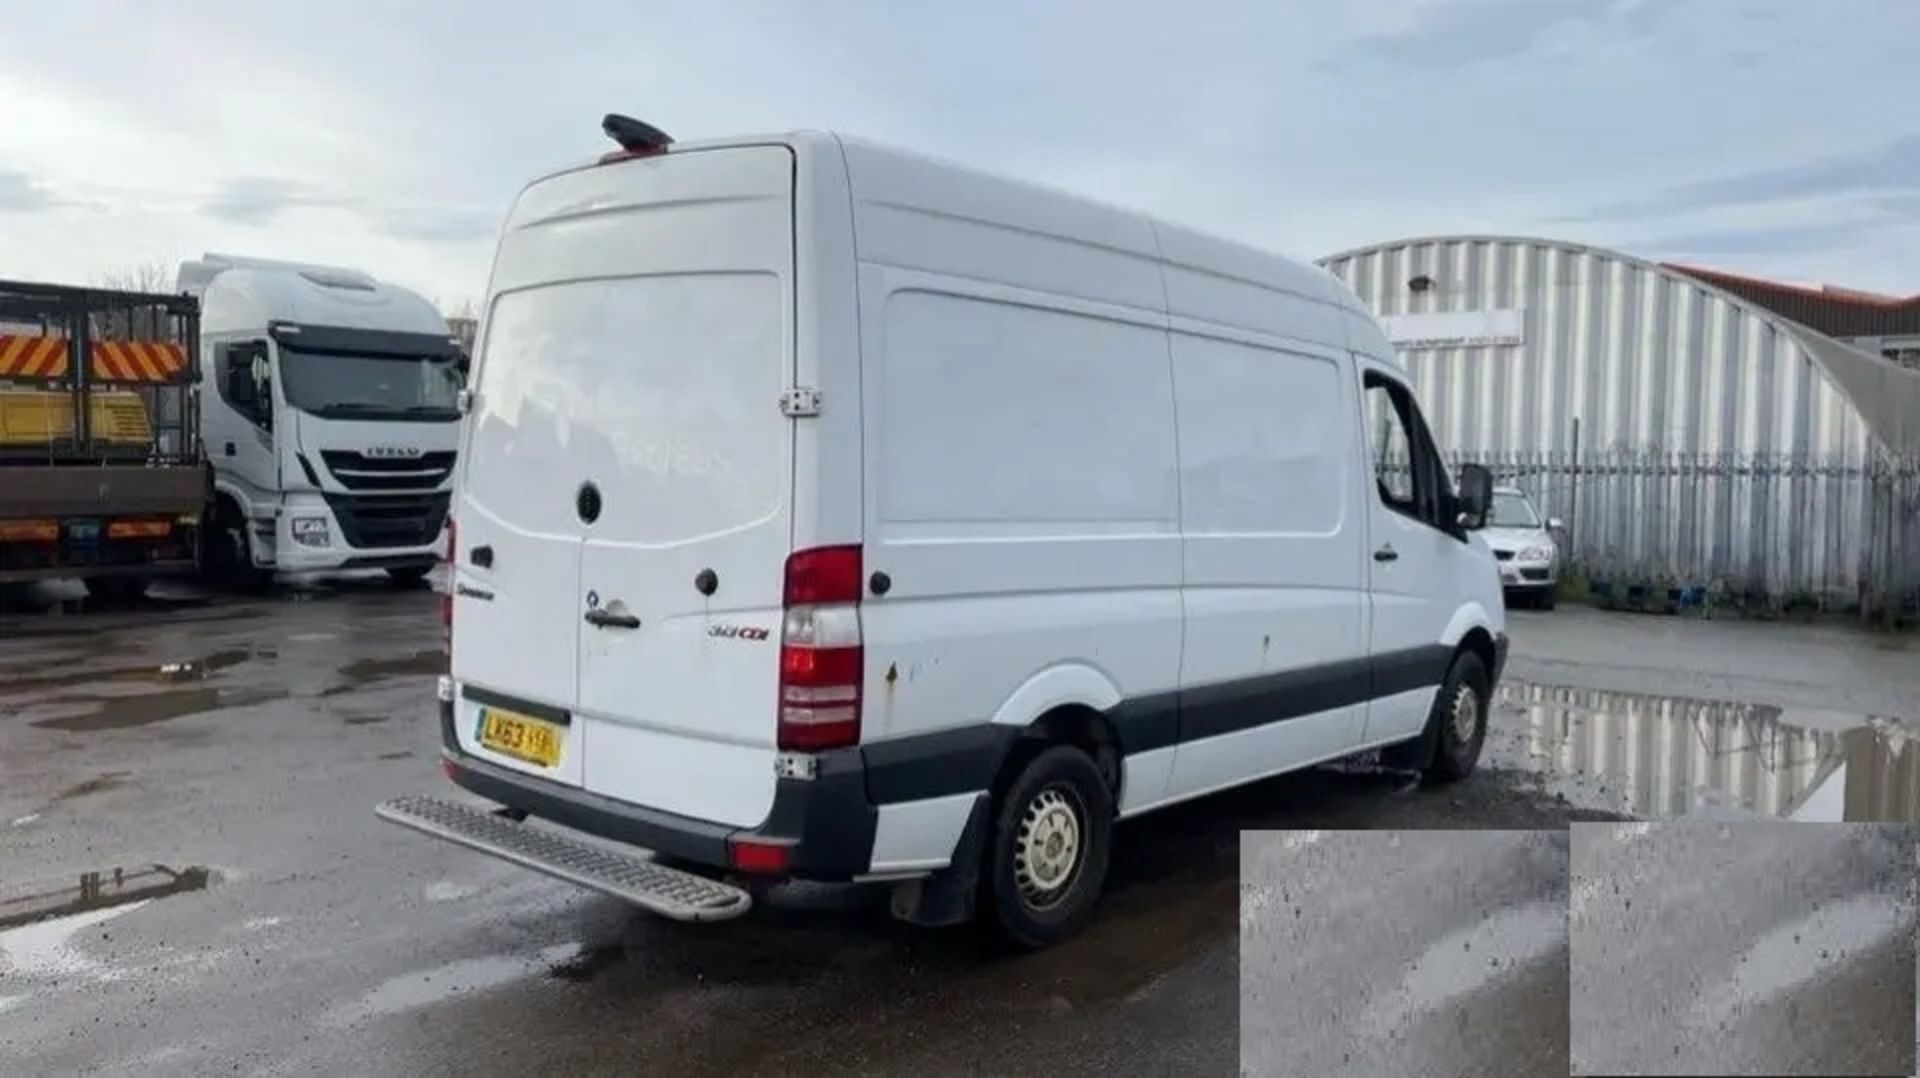 MERCEDES-BENZ SPRINTER 2013 - DIRECT FROM FEDEX, IDEAL FOR HEAVY DUTY - Image 2 of 13